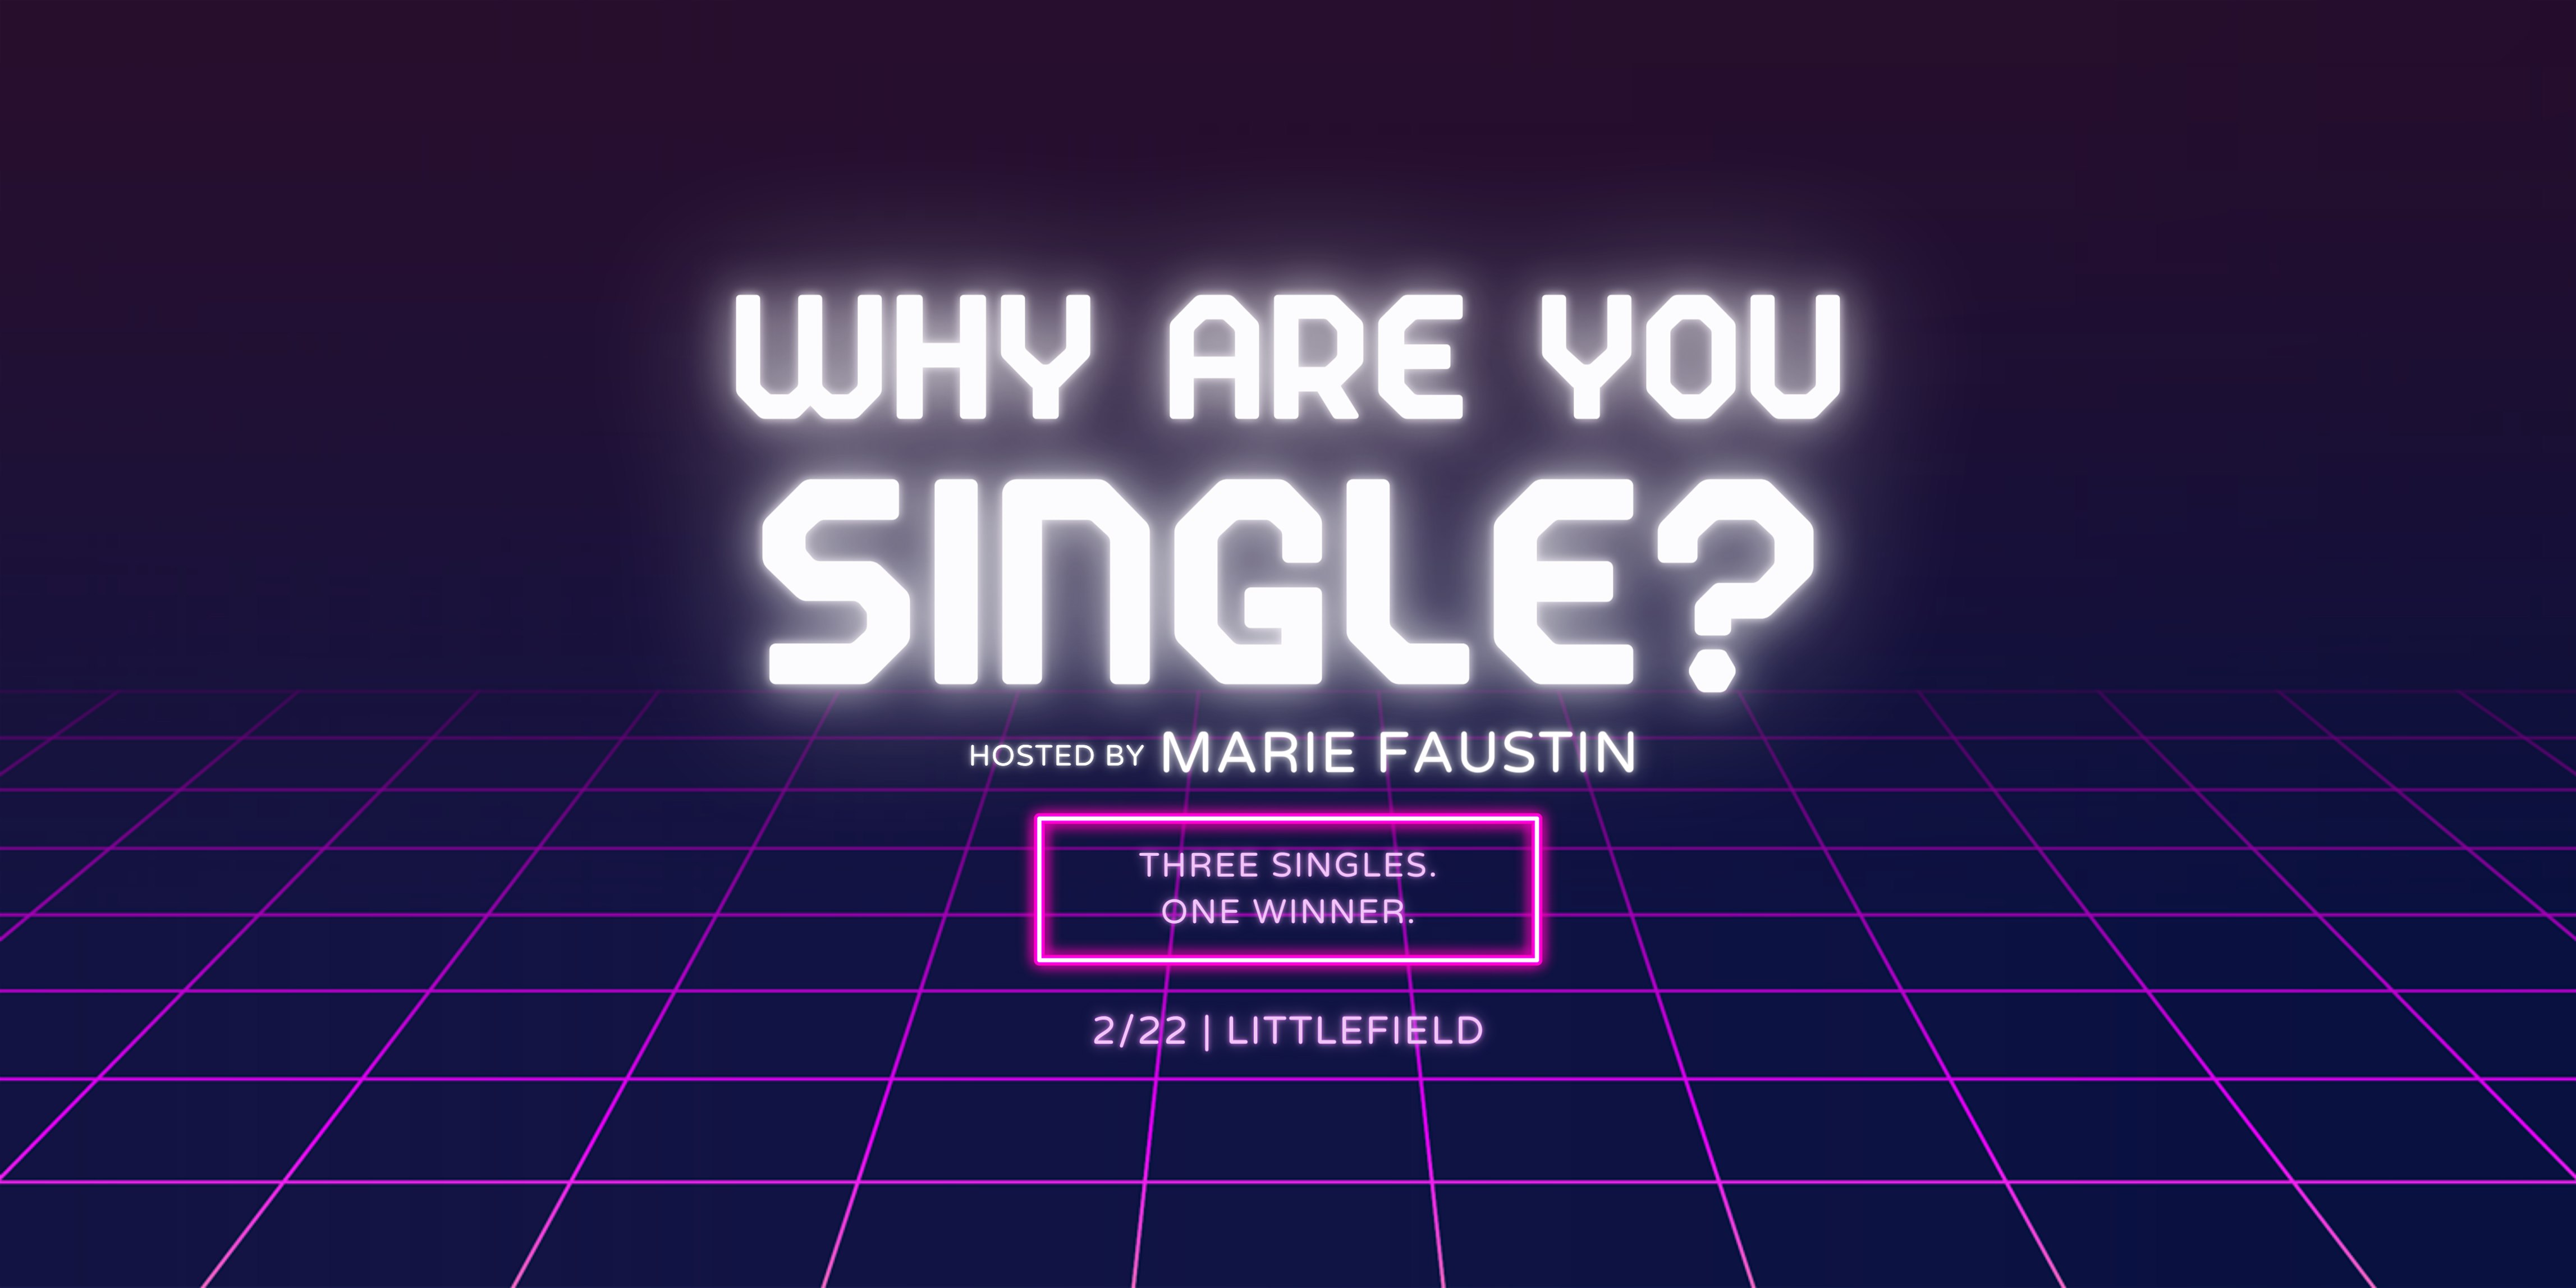 Why Are You Single? A Dating Game Show with Marie Faustin